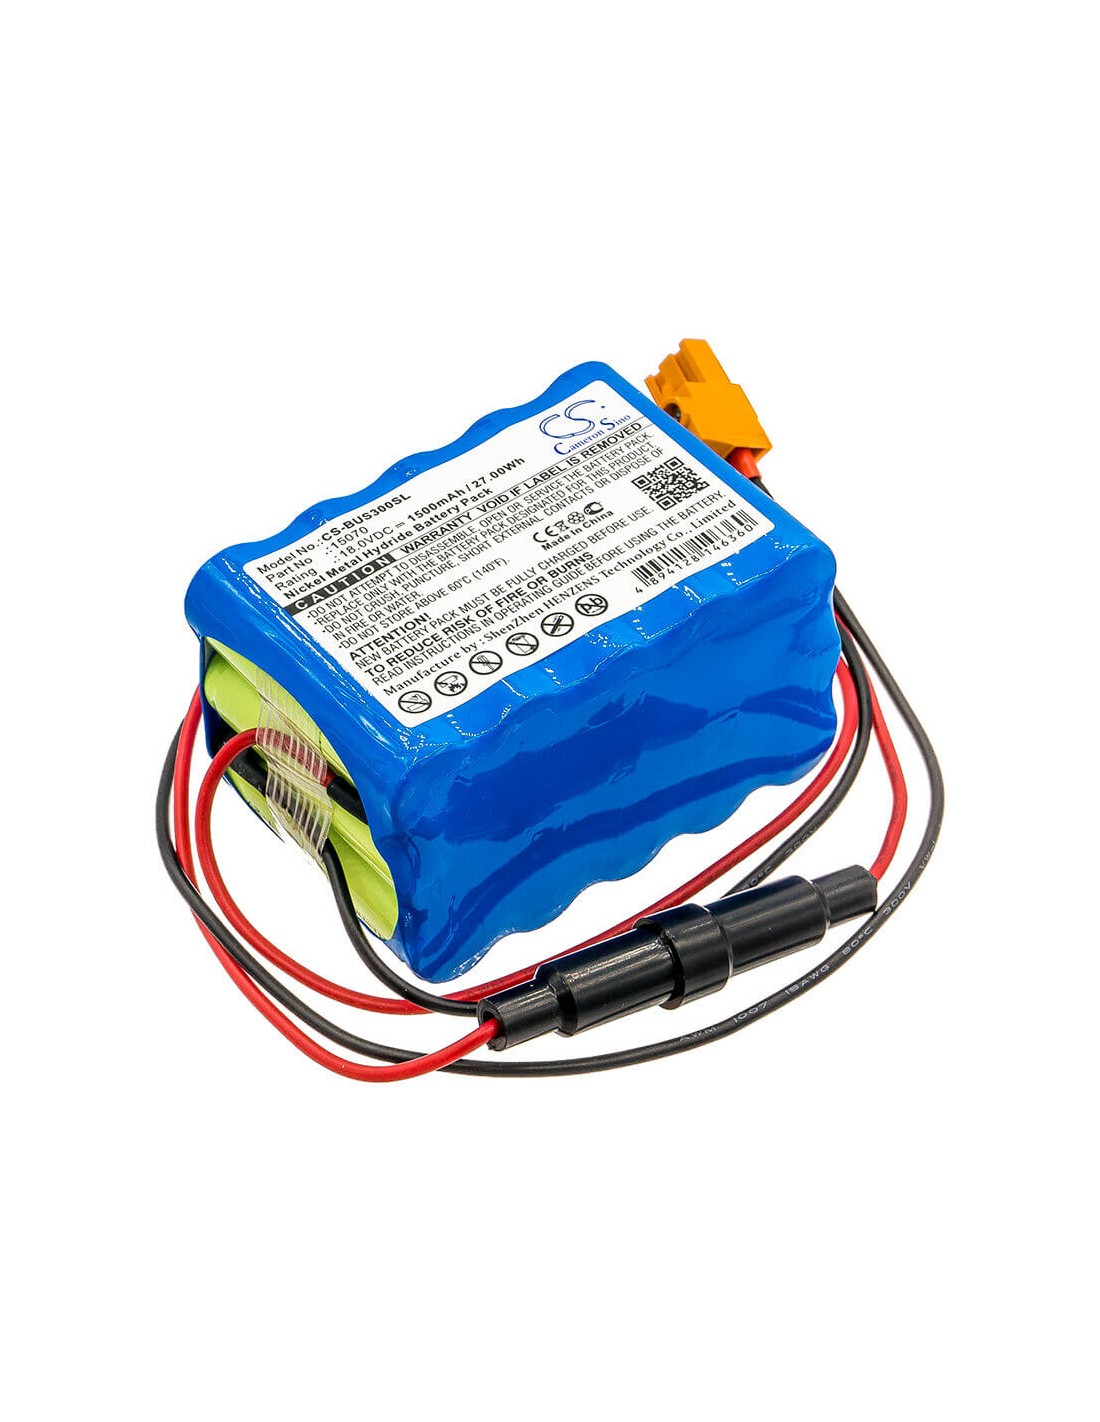 Battery for Besam, Automatische Turoffnung Cud3000, 18V, 1500mAh - 27.00Wh